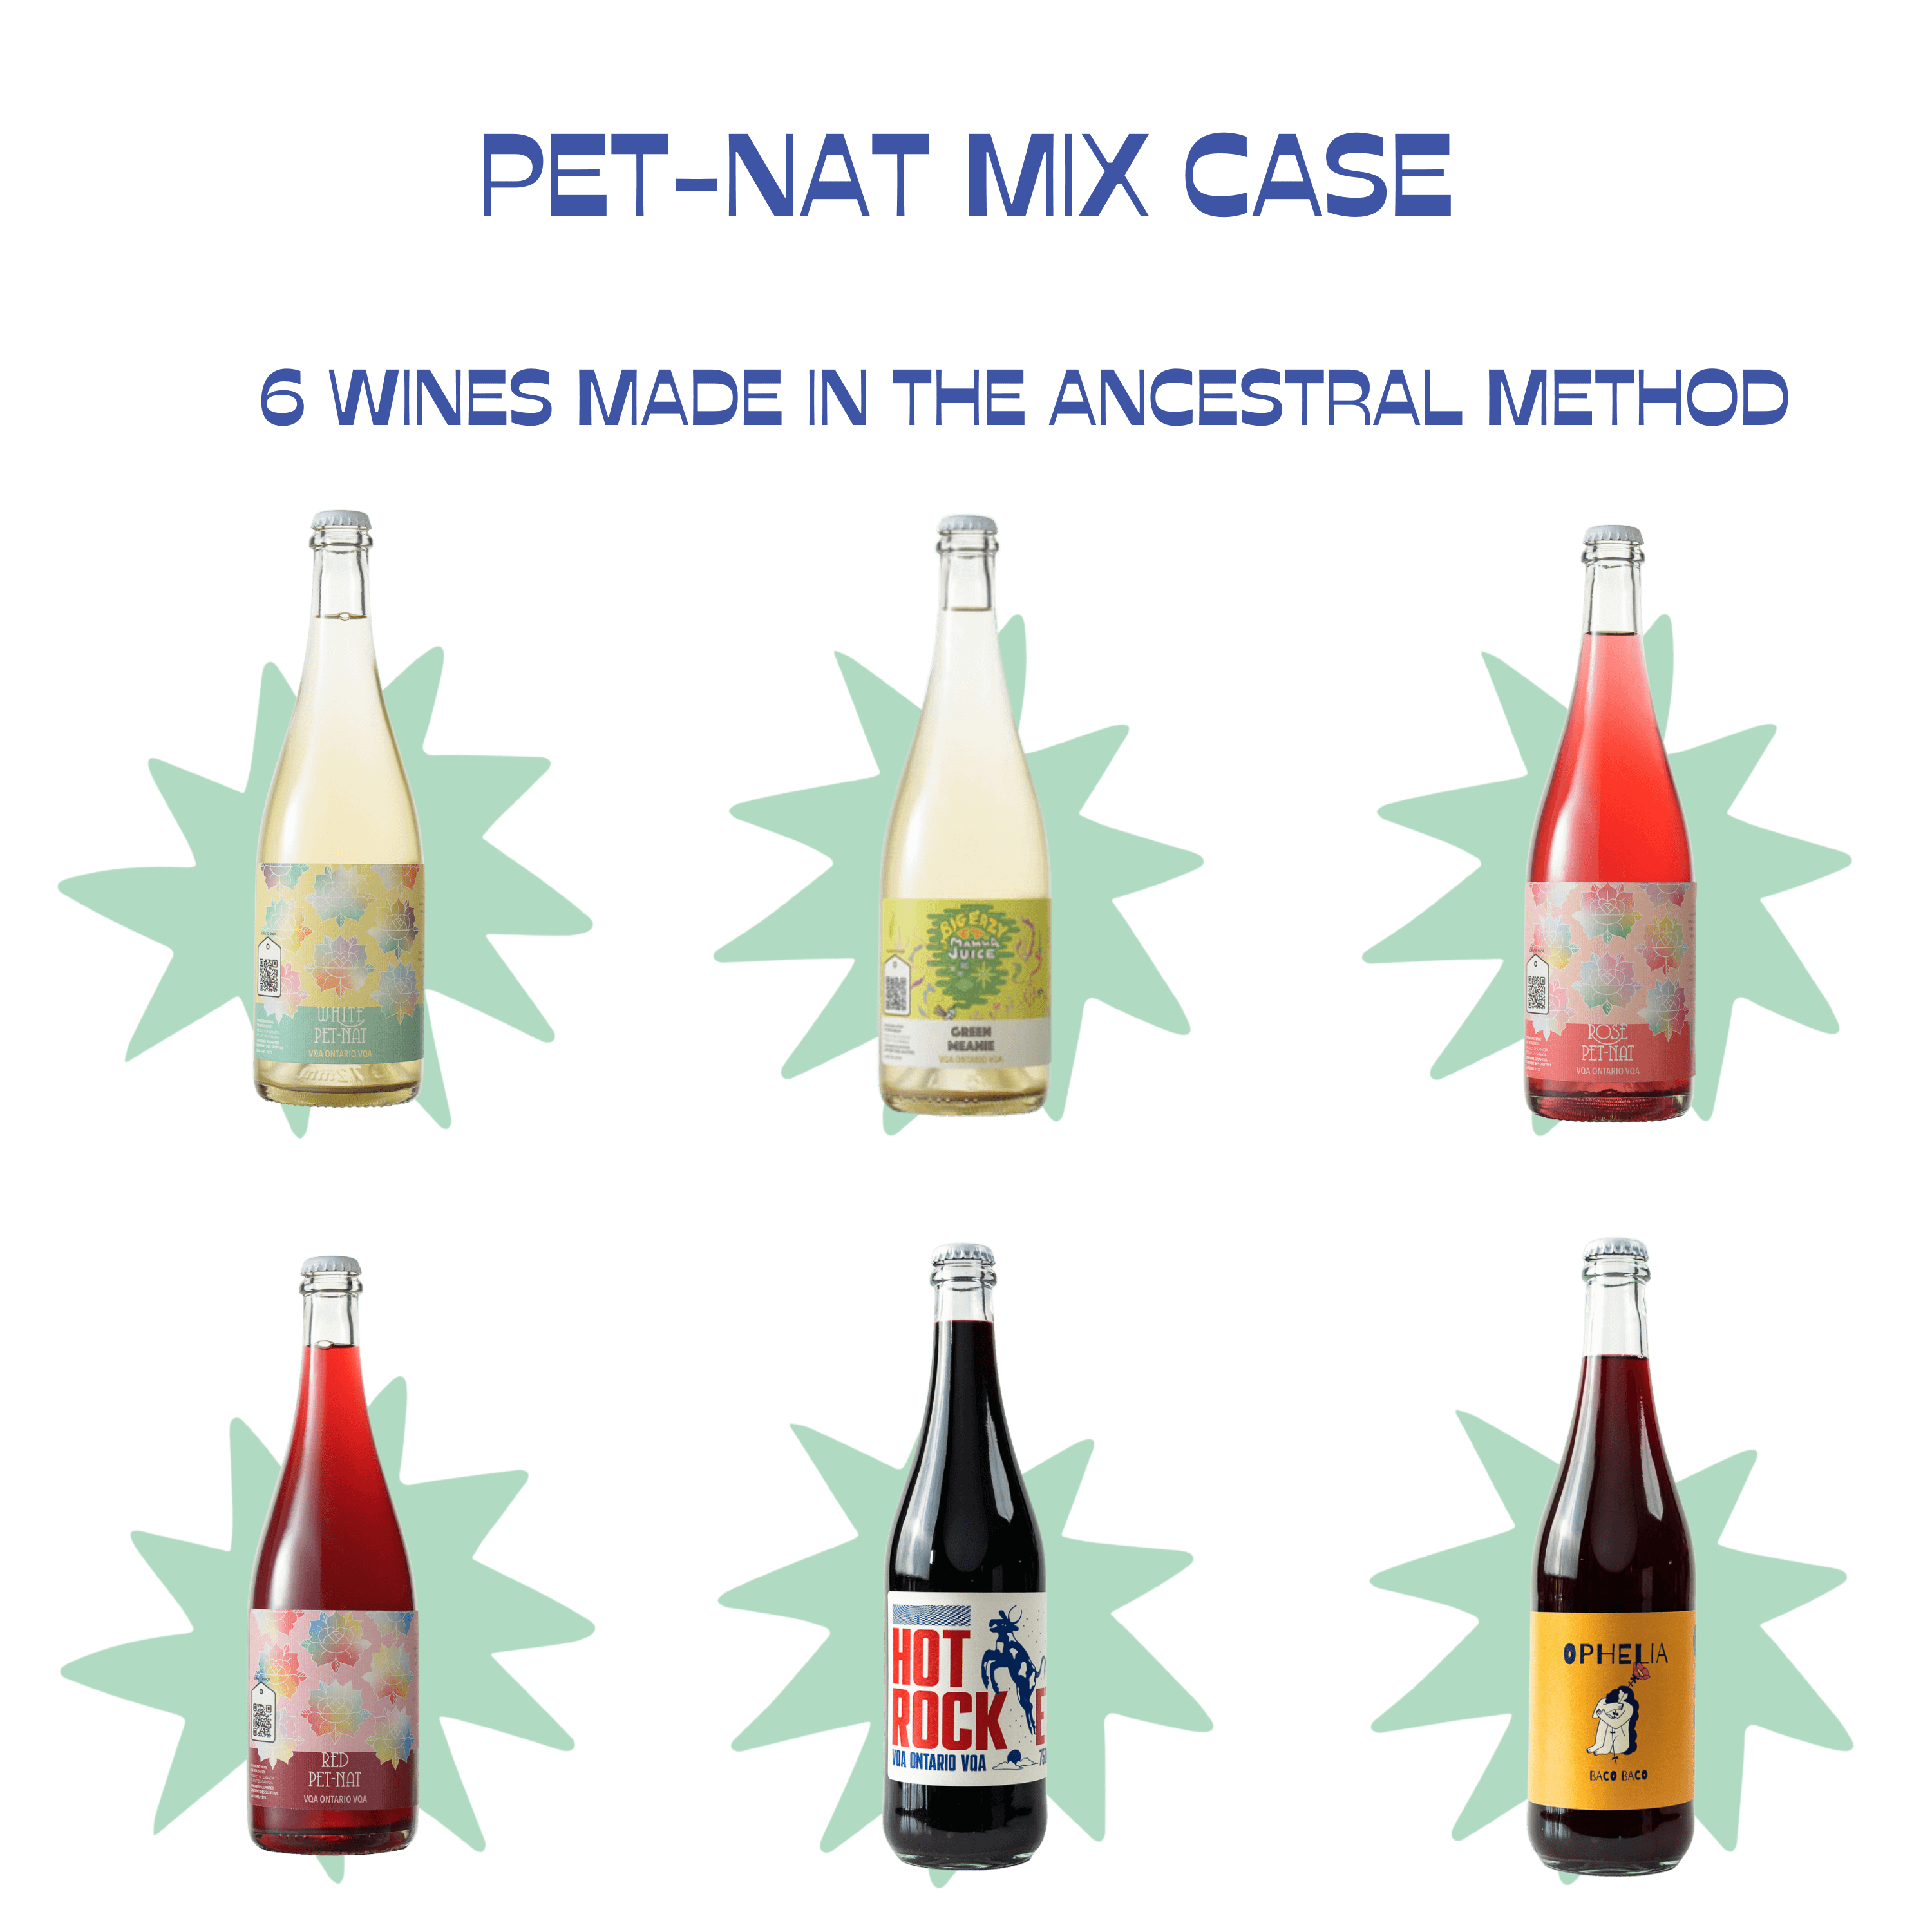 Bundle pack of red white pet-nat sparkling natural wines from Traynor Family Vineyard a winery in Prince Edward County, Ontario